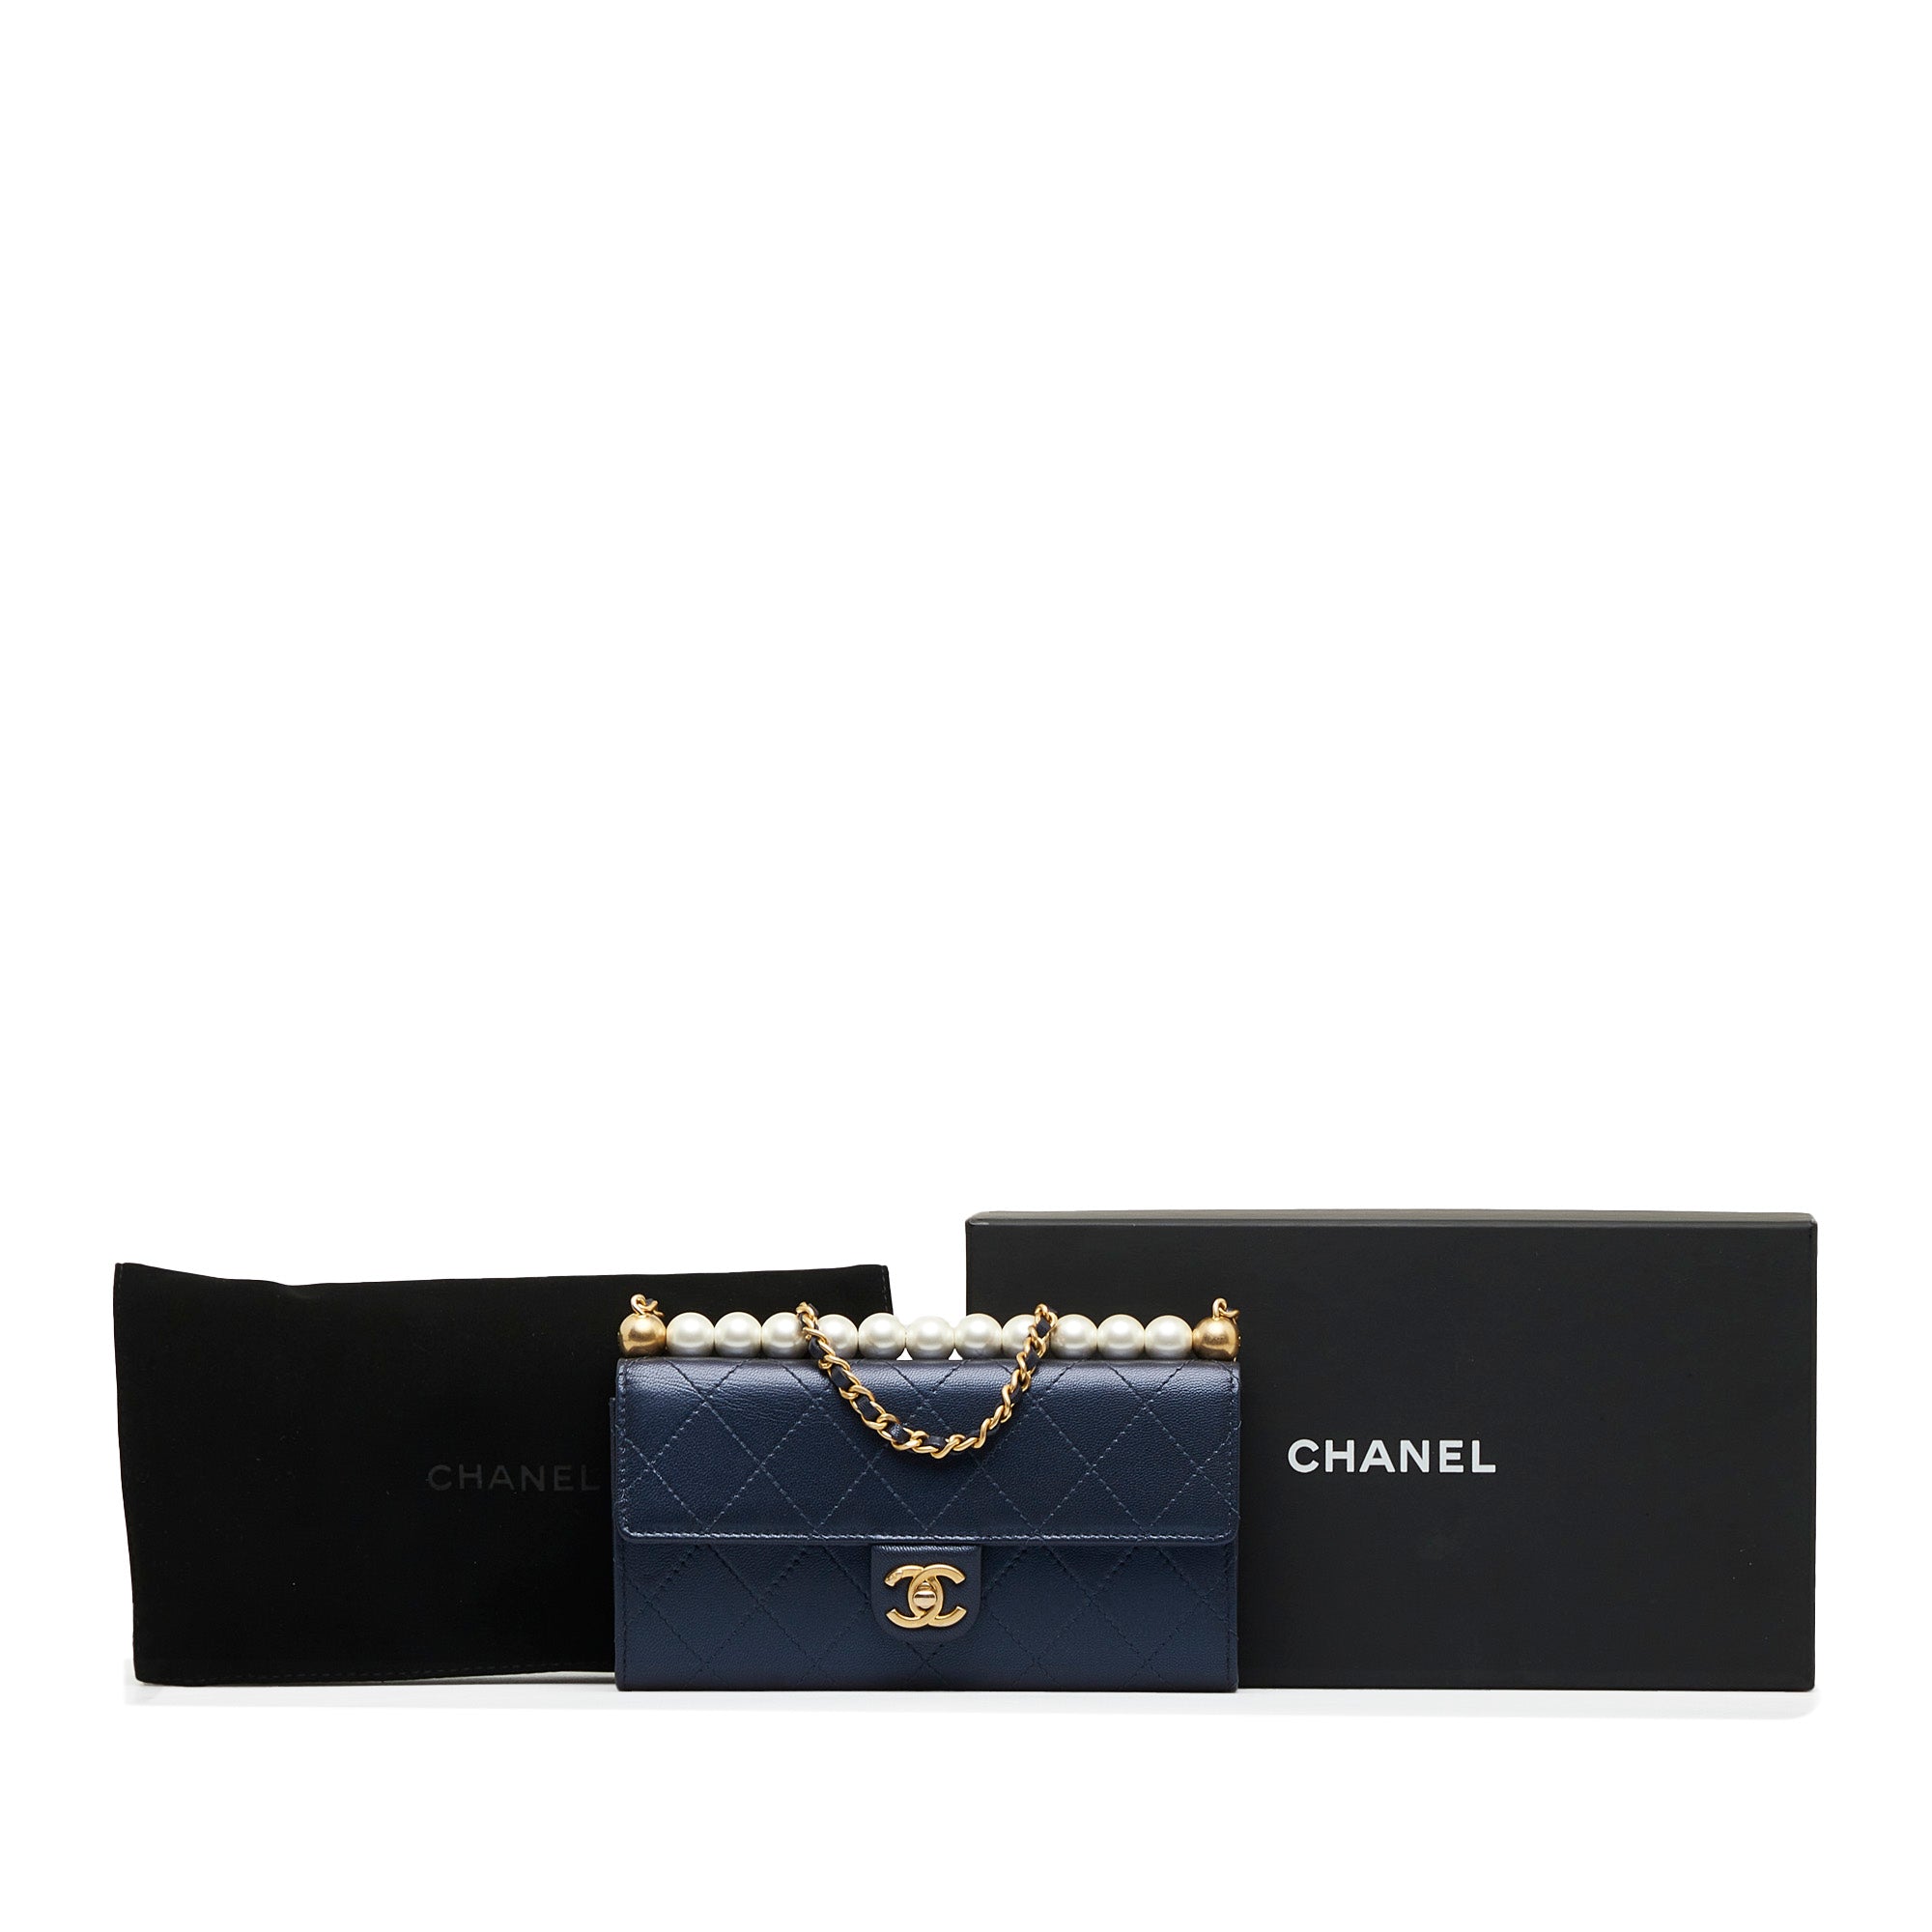 Chanel Navyblue Goatskin Chic Pearls Clutch With Chain Chanel